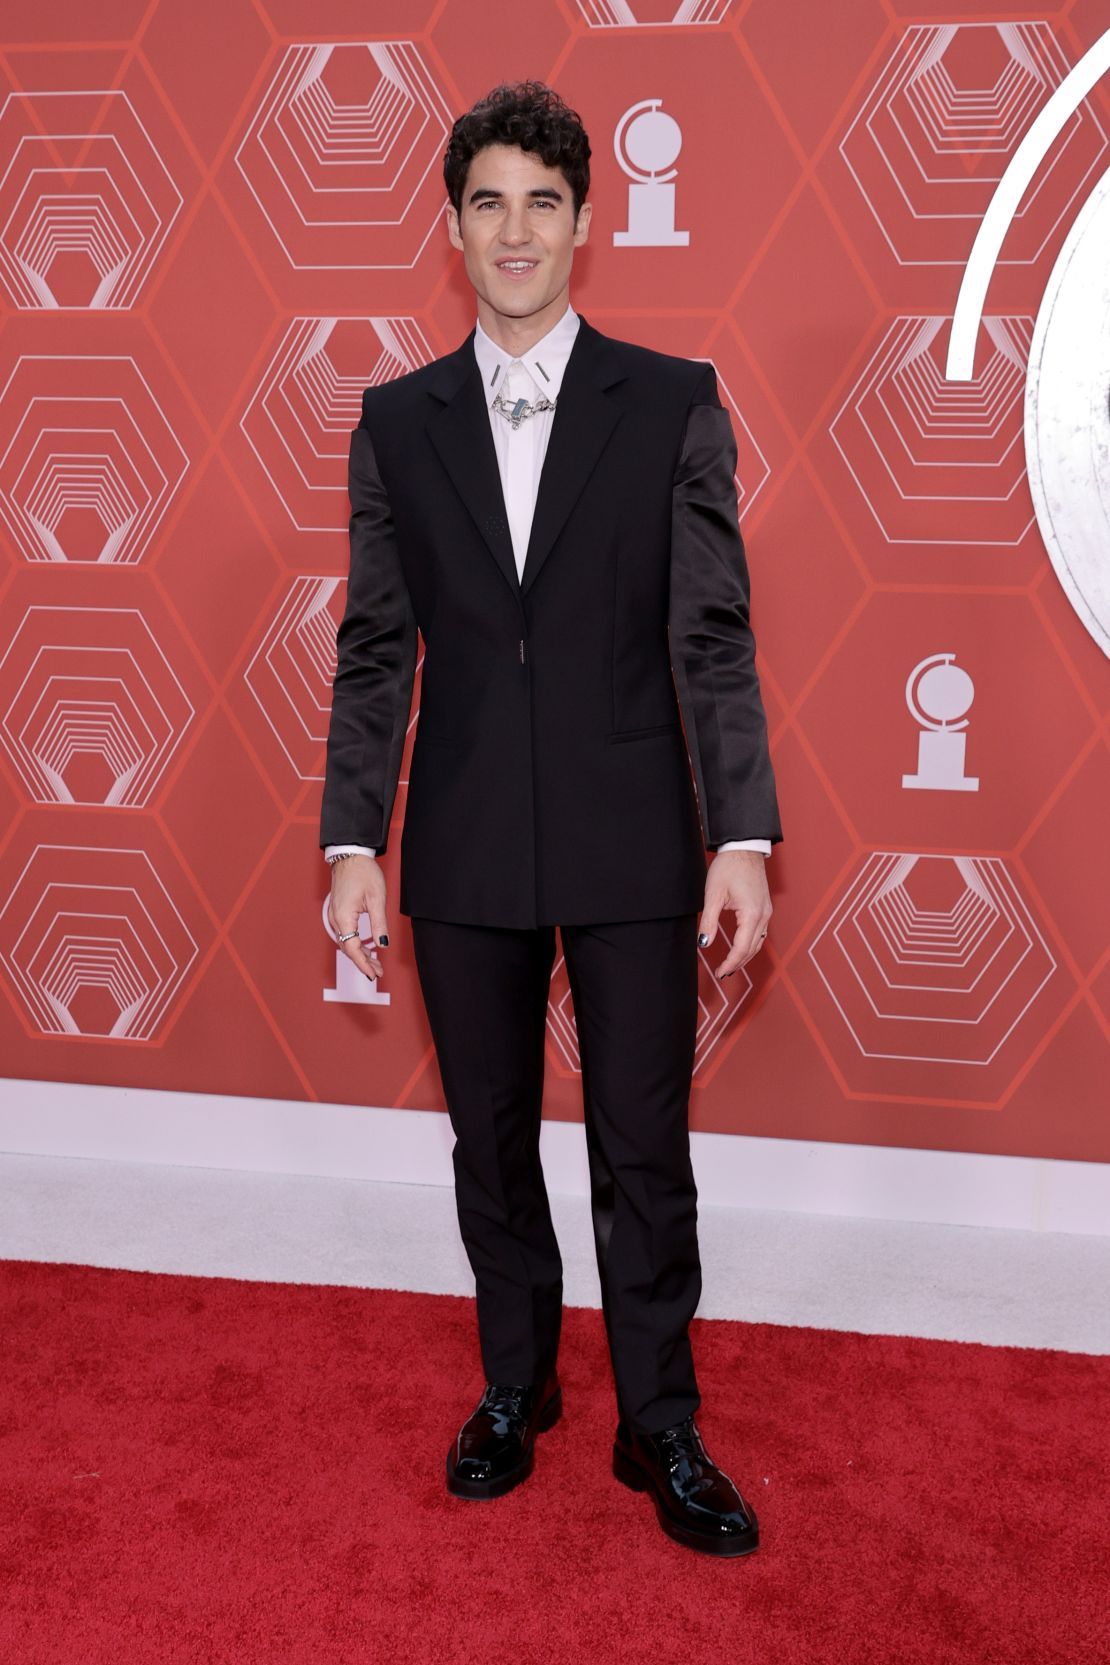 Darren Criss attends the 74th Annual Tony Awards at Winter Garden Theater on September 26, 2021, in New York City. And he'll be one of the featured performers at the Macy's Parade.